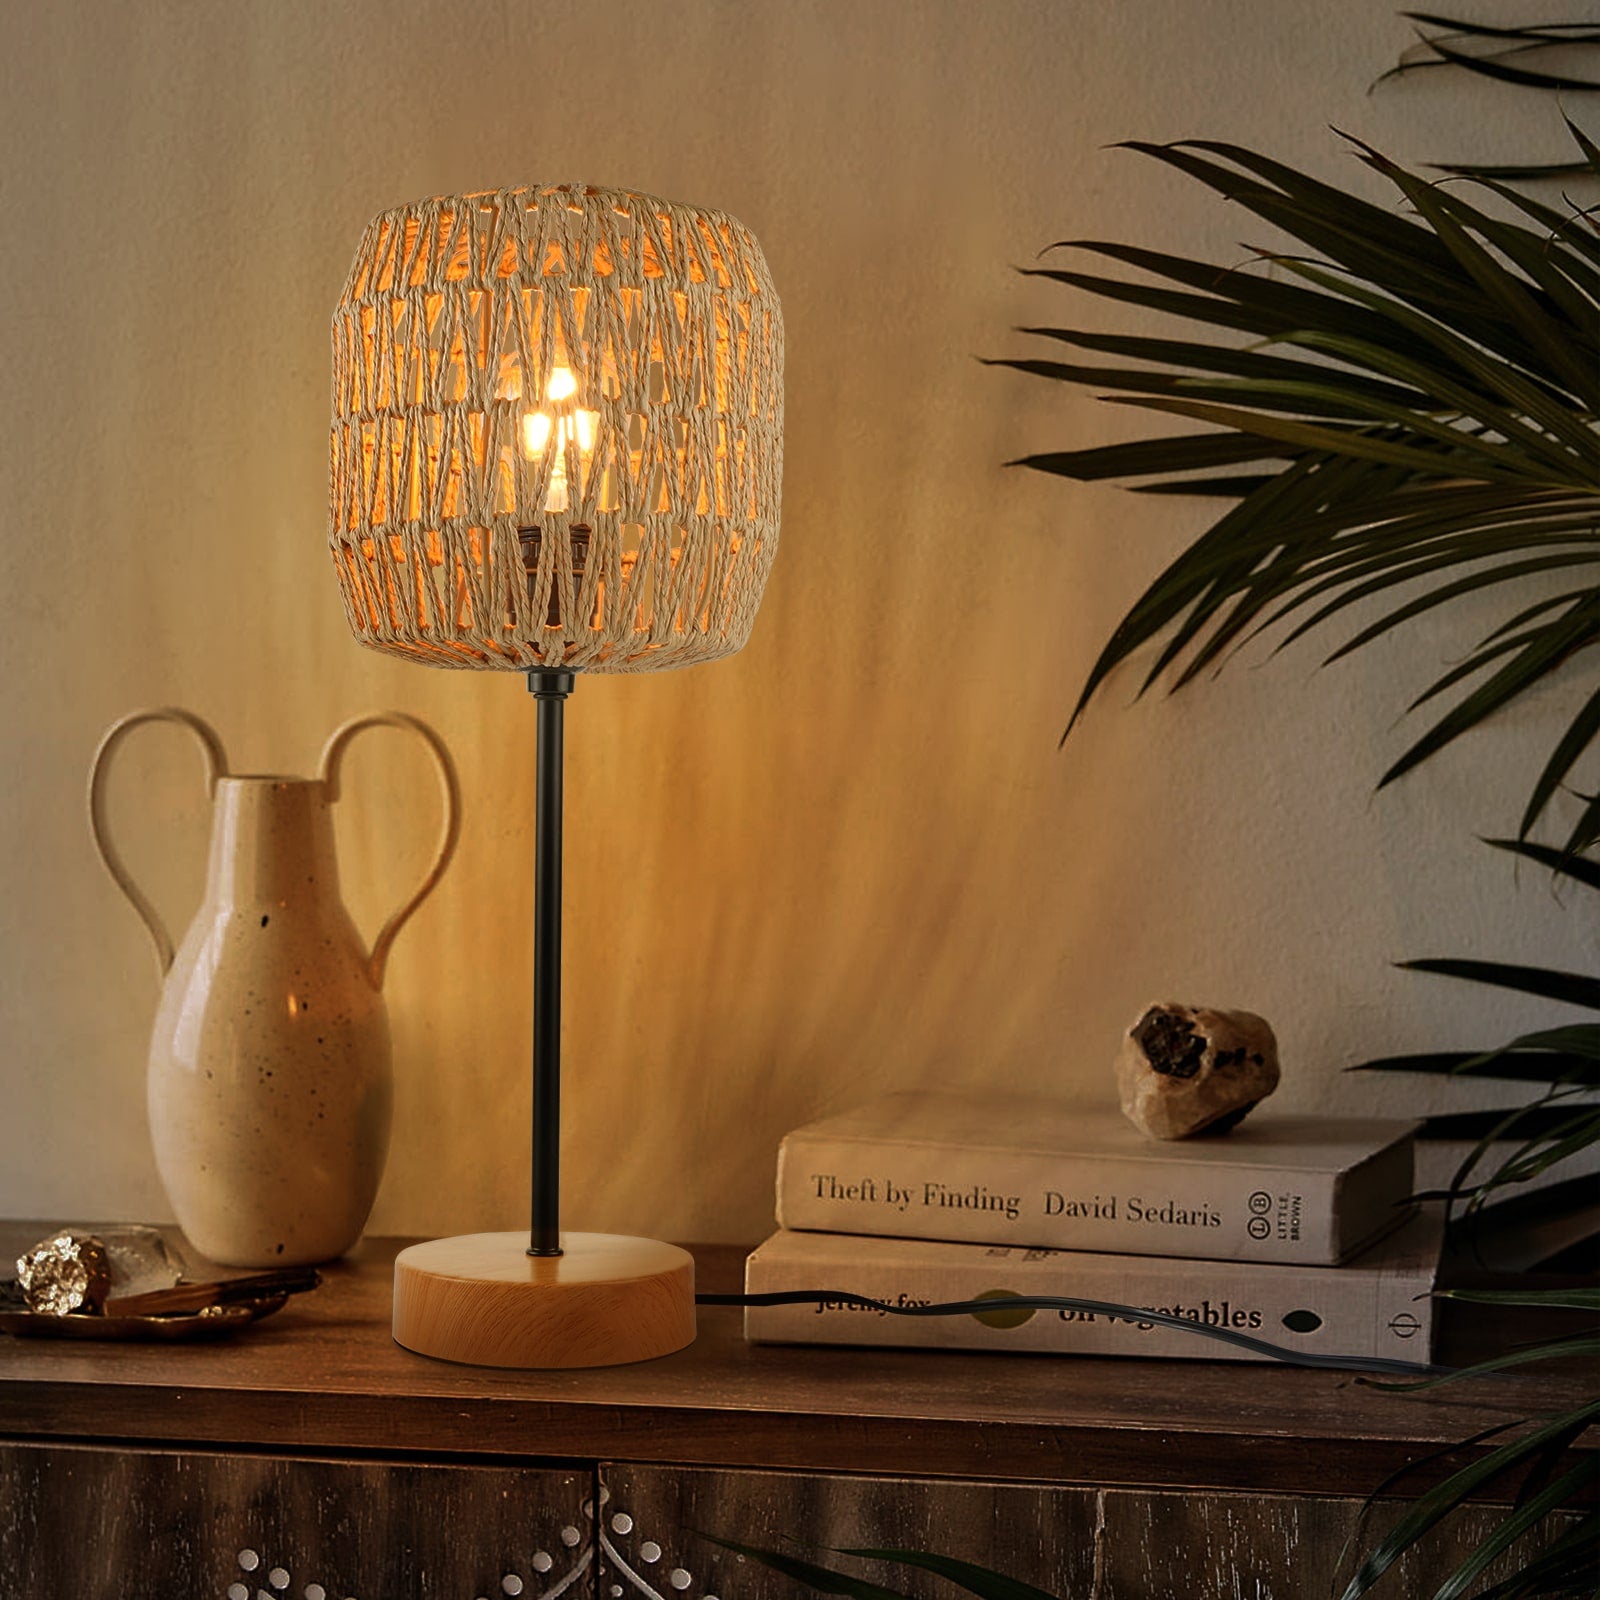 Vintage Aesthetic Lamps | Affordable & Effective Room Decor Ideas